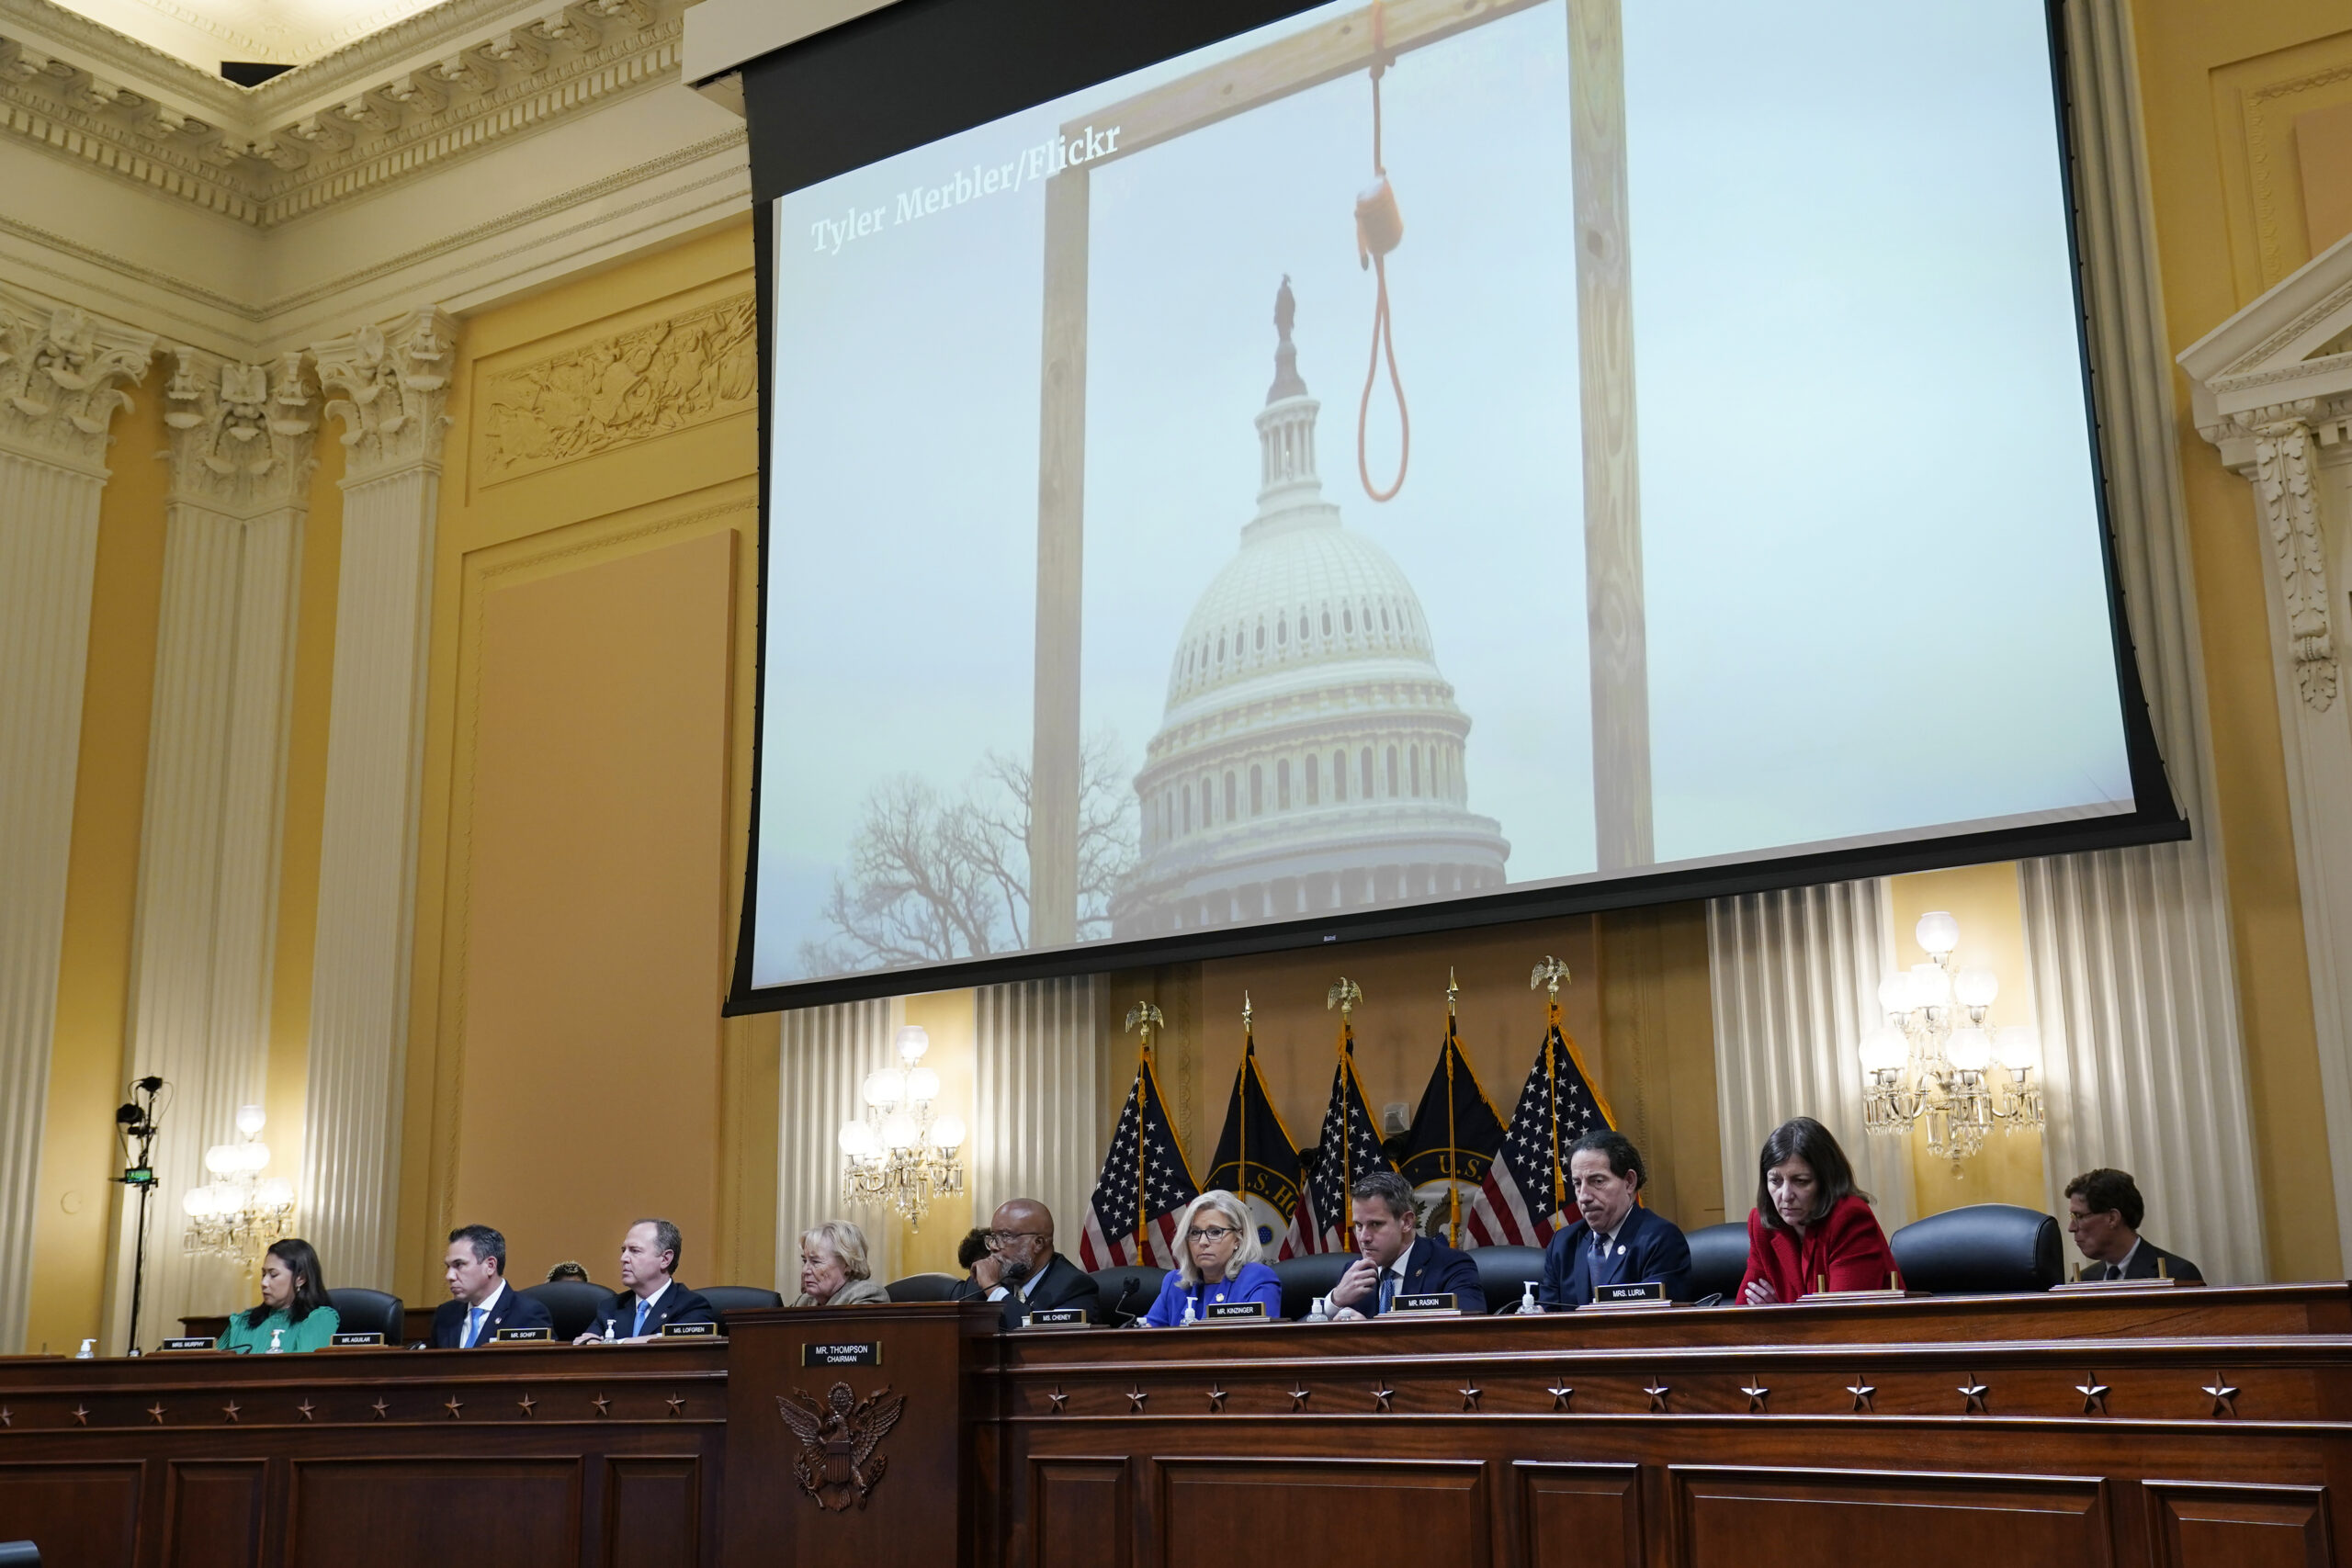 An image of a mock gallows on the grounds of the U.S. Capitol on Jan. 6th is shown as committee members from left to right, Rep. Stephanie Murphy, D-Fla., Rep. Pete Aguilar, D-Calif., Rep. Adam Schiff, D-Calif., Rep. Zoe Lofgren, D-Calif., Chairman Bennie Thompson, D-Miss., Vice Chair Liz Cheney, R-Wyo., Rep. Adam Kinzinger, R-Ill., Rep. Jamie Raskin, D-Md., and Rep. Elaine Luria, D-Va., look on, as the House select committee investigating the Jan. 6 attack on the U.S. Capitol holds its first public hearing to reveal the findings of a year-long investigation, at the Capitol in Washington, Thursday, June 9, 2022. (AP Photo/J. Scott Applewhite)